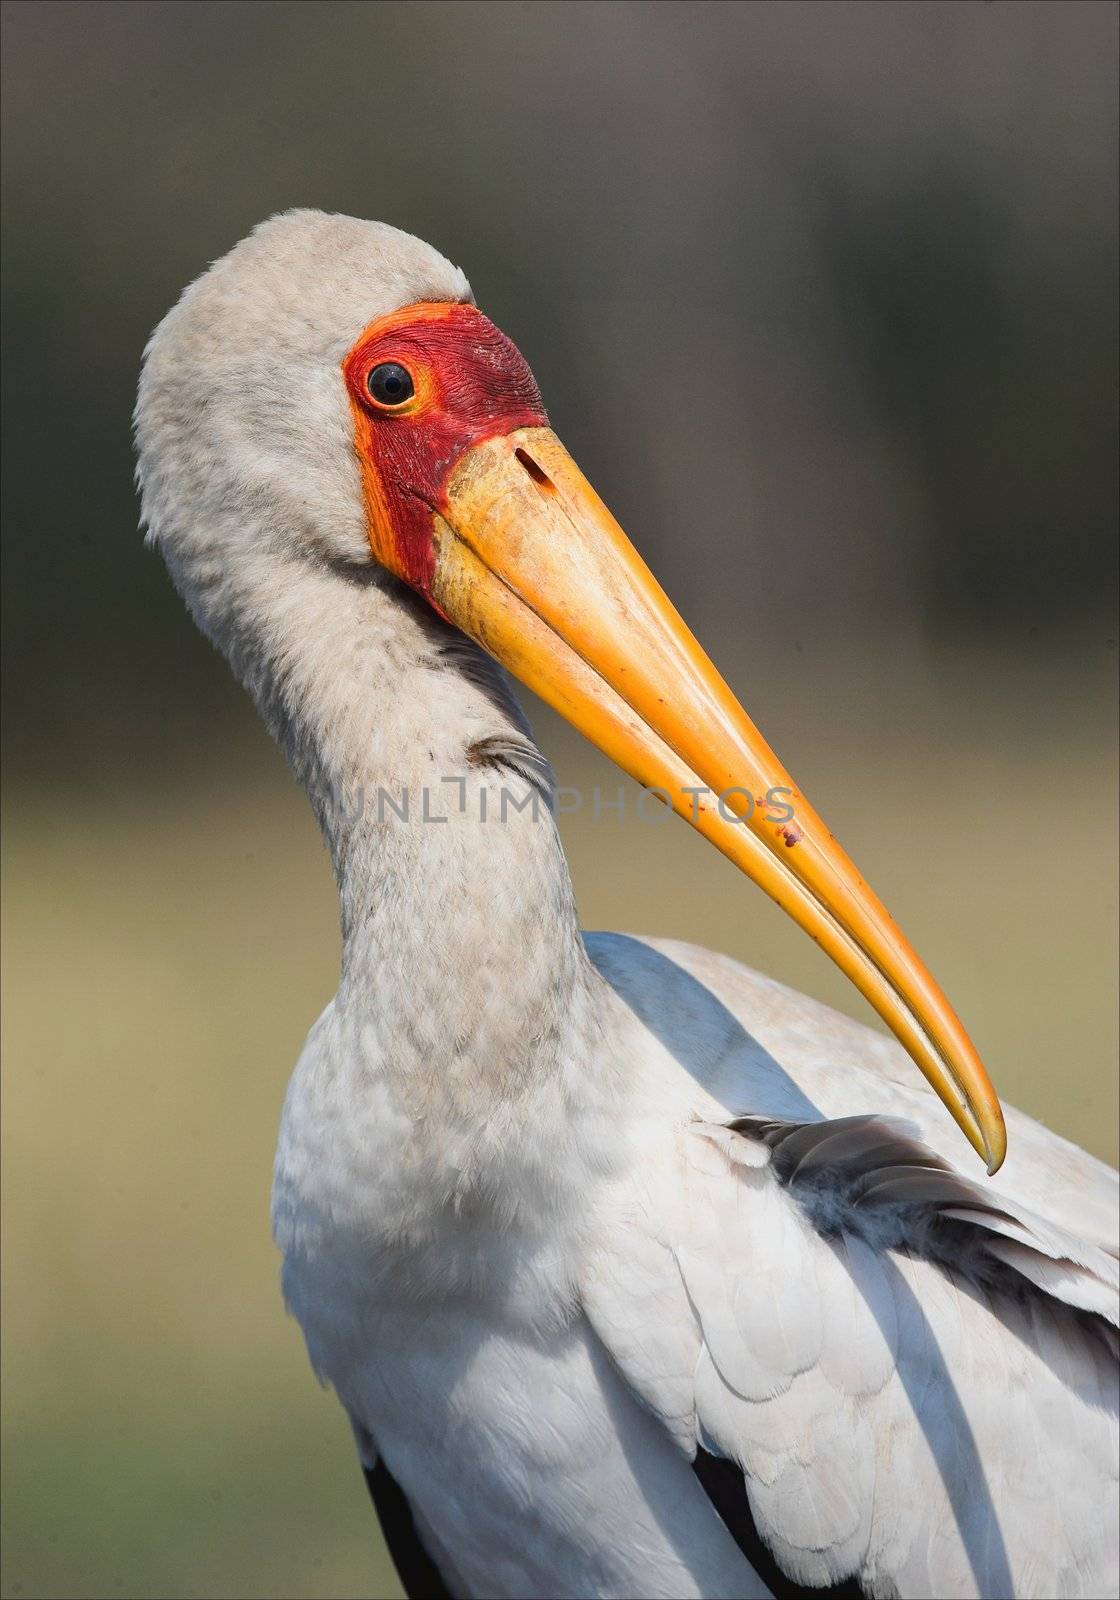 The Yellow-billed Stork. by SURZ